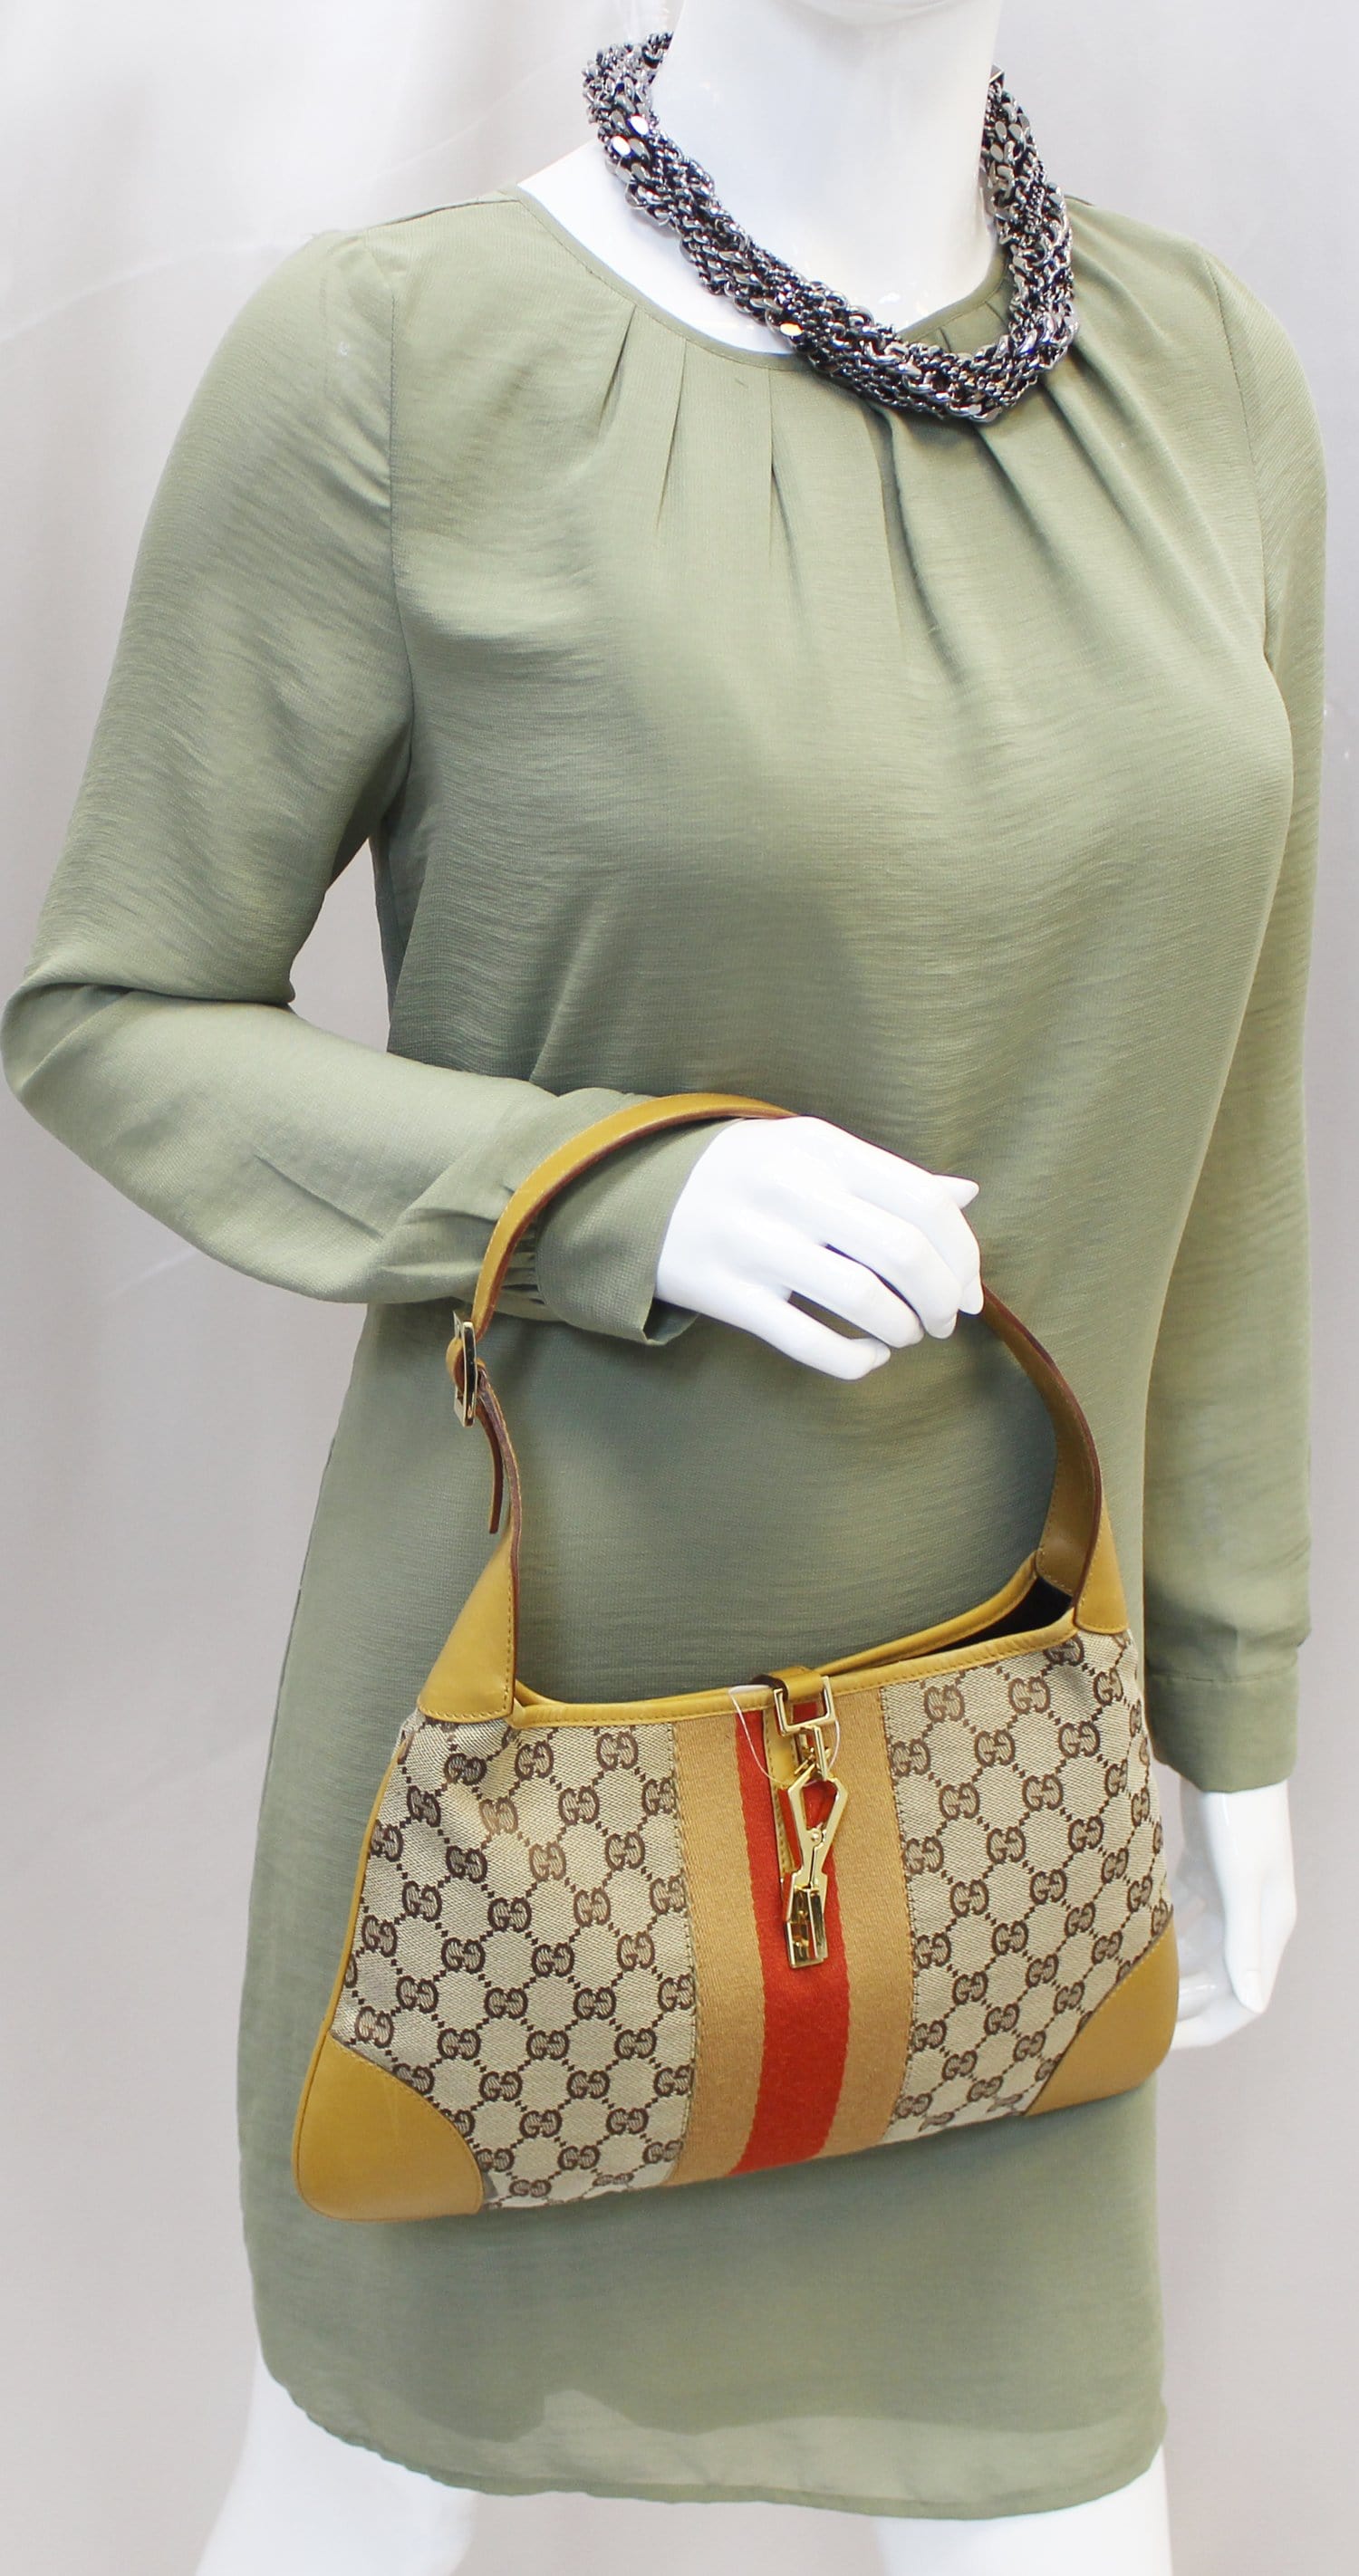 GUCCI Crystal GG/New Jackie/Bamboo Shoulder Bag coated canvas leather fedex  600